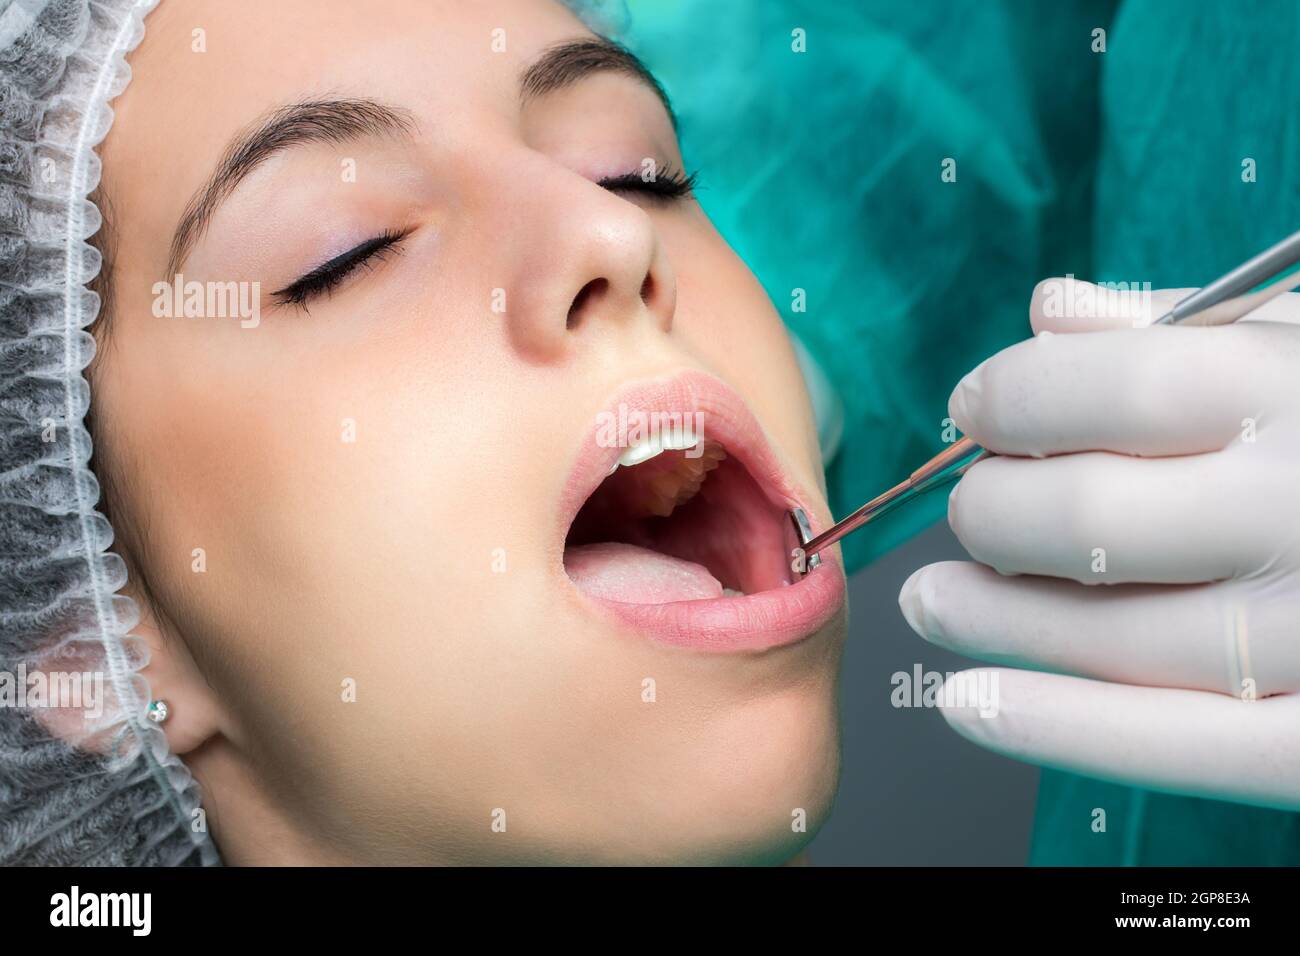 Close up macro face shot of woman being prepared for dental surgery.Hand with glove doing check up with mouth mirror on teeth. Stock Photo